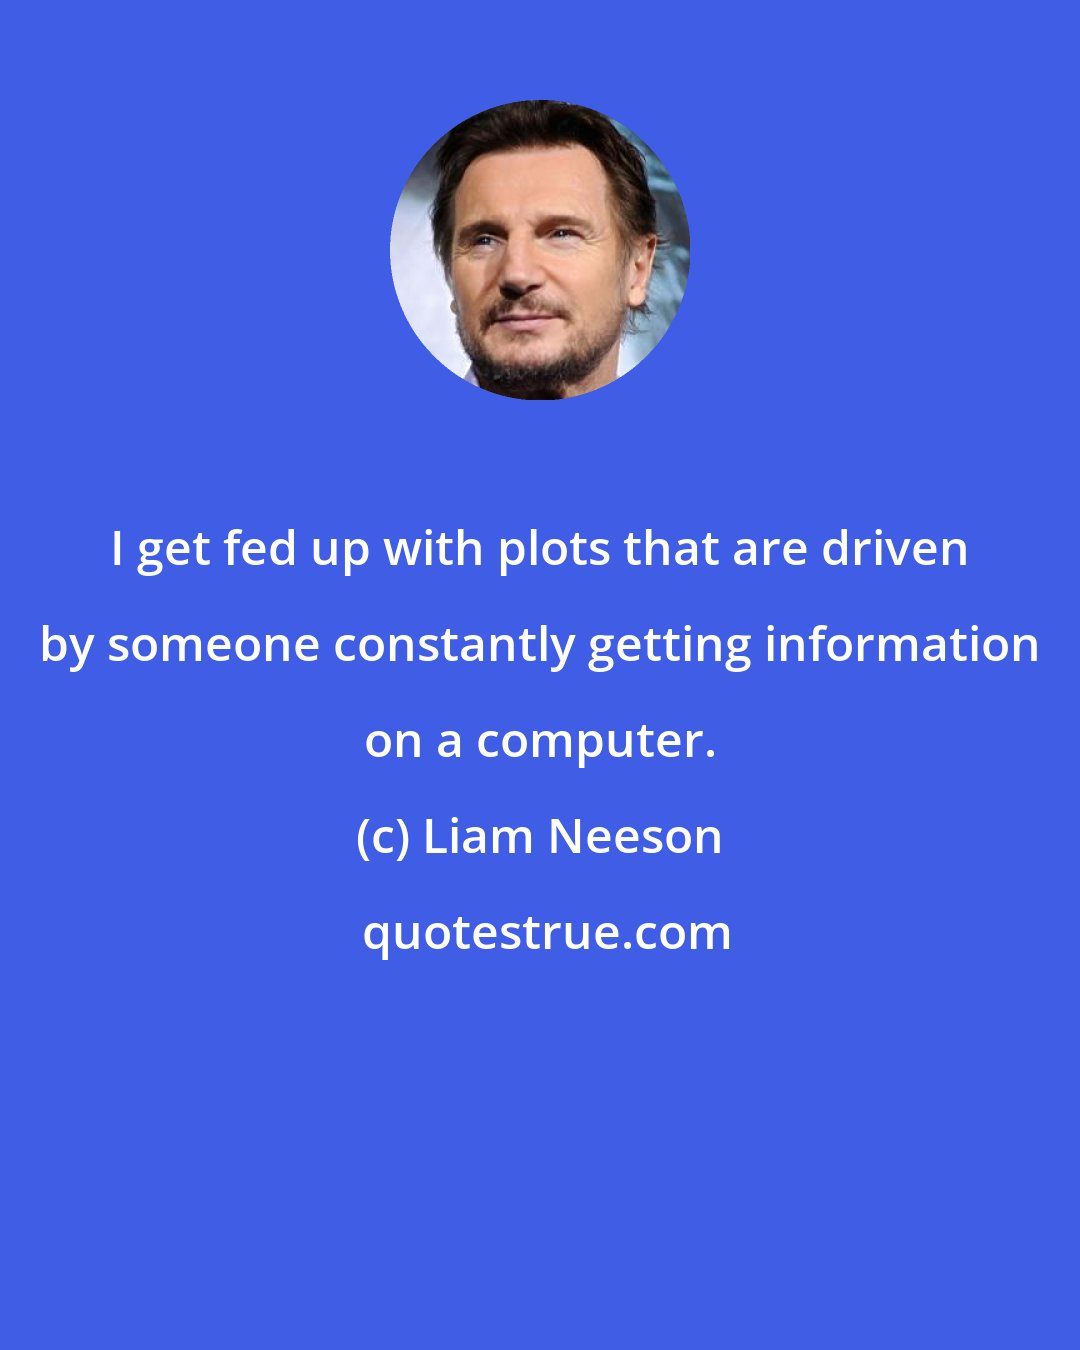 Liam Neeson: I get fed up with plots that are driven by someone constantly getting information on a computer.